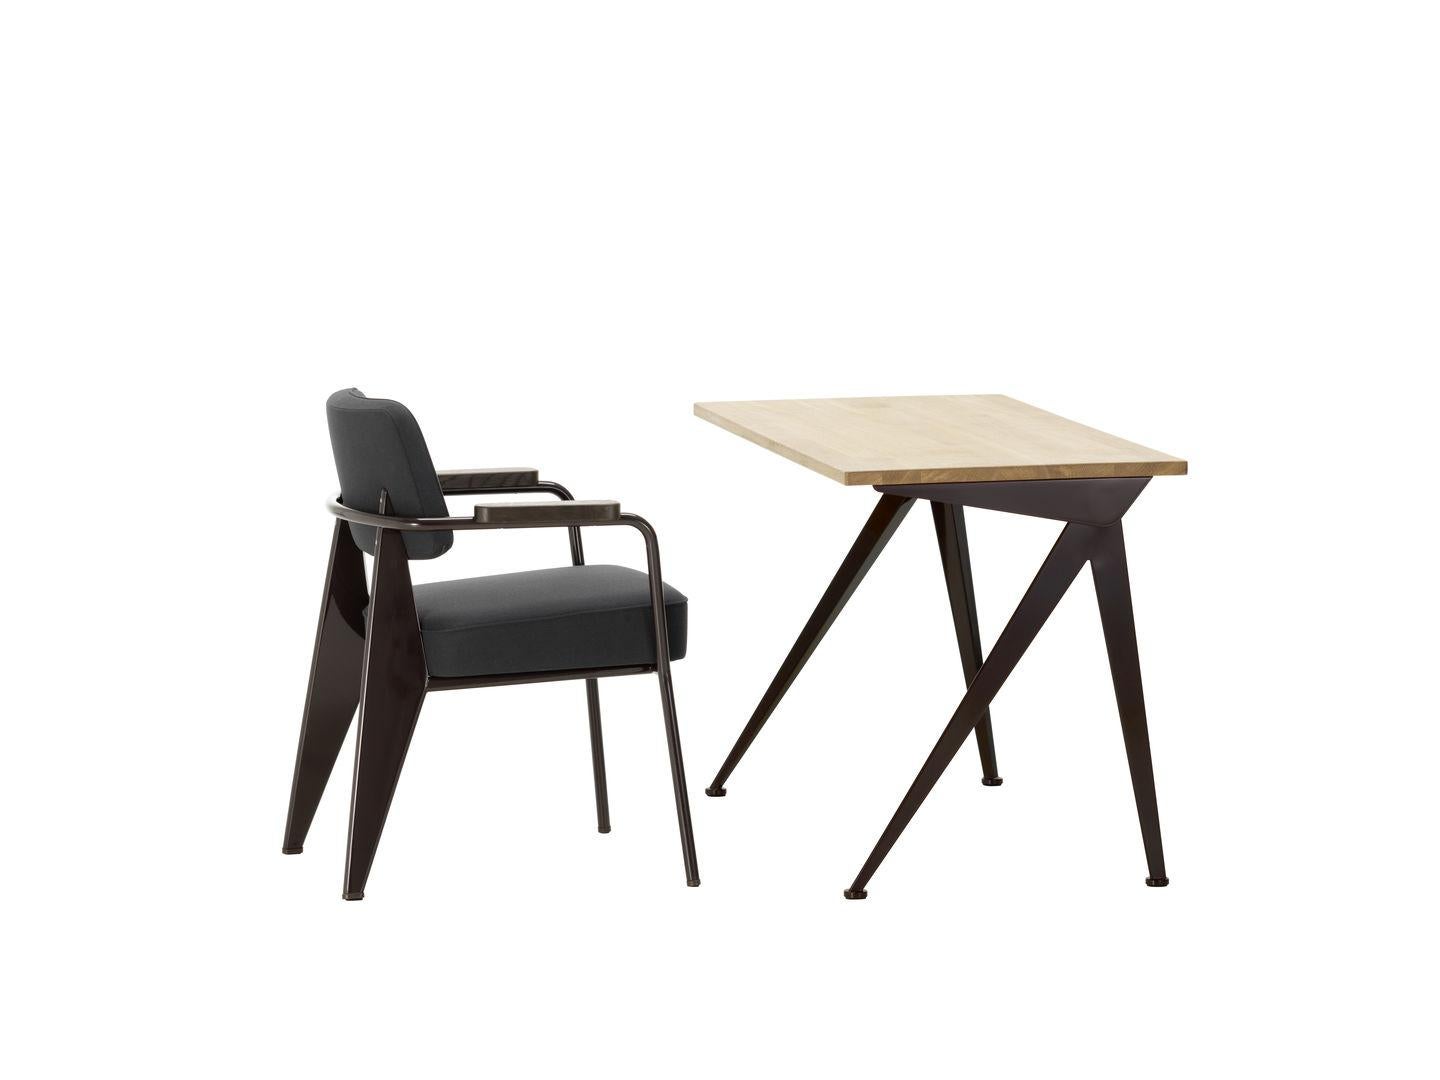 Desk designed by Jean Prouvé in 1953.
Chair designed by Jean Prouvé in 1951.
Manufactured by Vitra, Switzerland.

About Compas Direction Desk:
The slender, elegantly splayed metal legs of the Compas Direction desk by Jean Prouvé call to mind